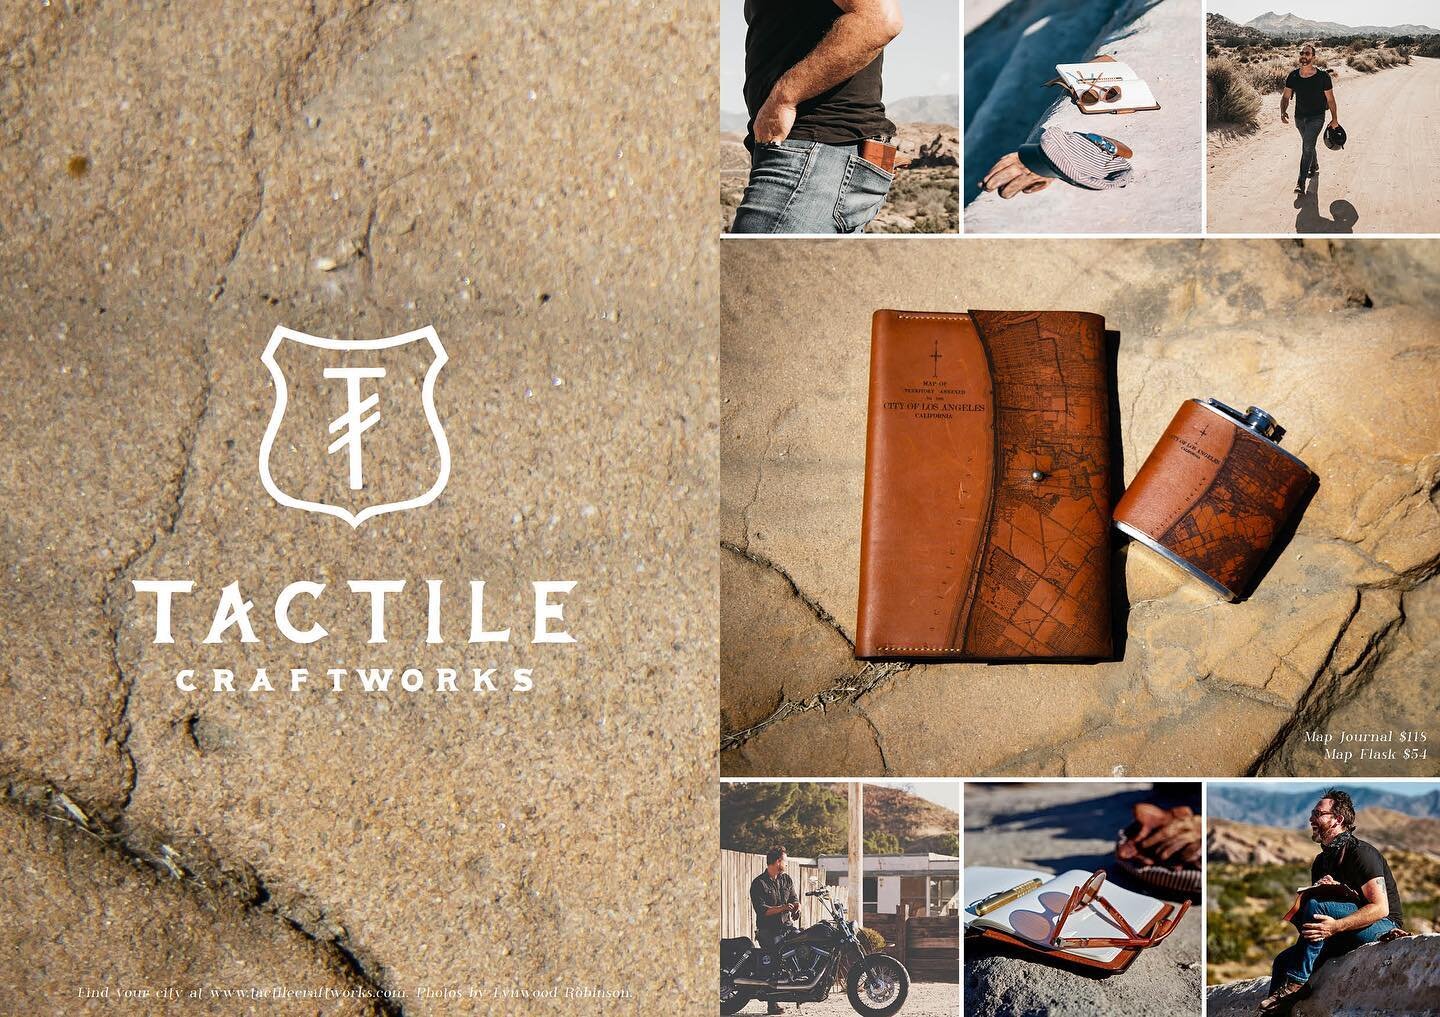 Only the best  #tactile #tactilecraftworks #leather #flask #traveljournal #motorcyclelife #camping